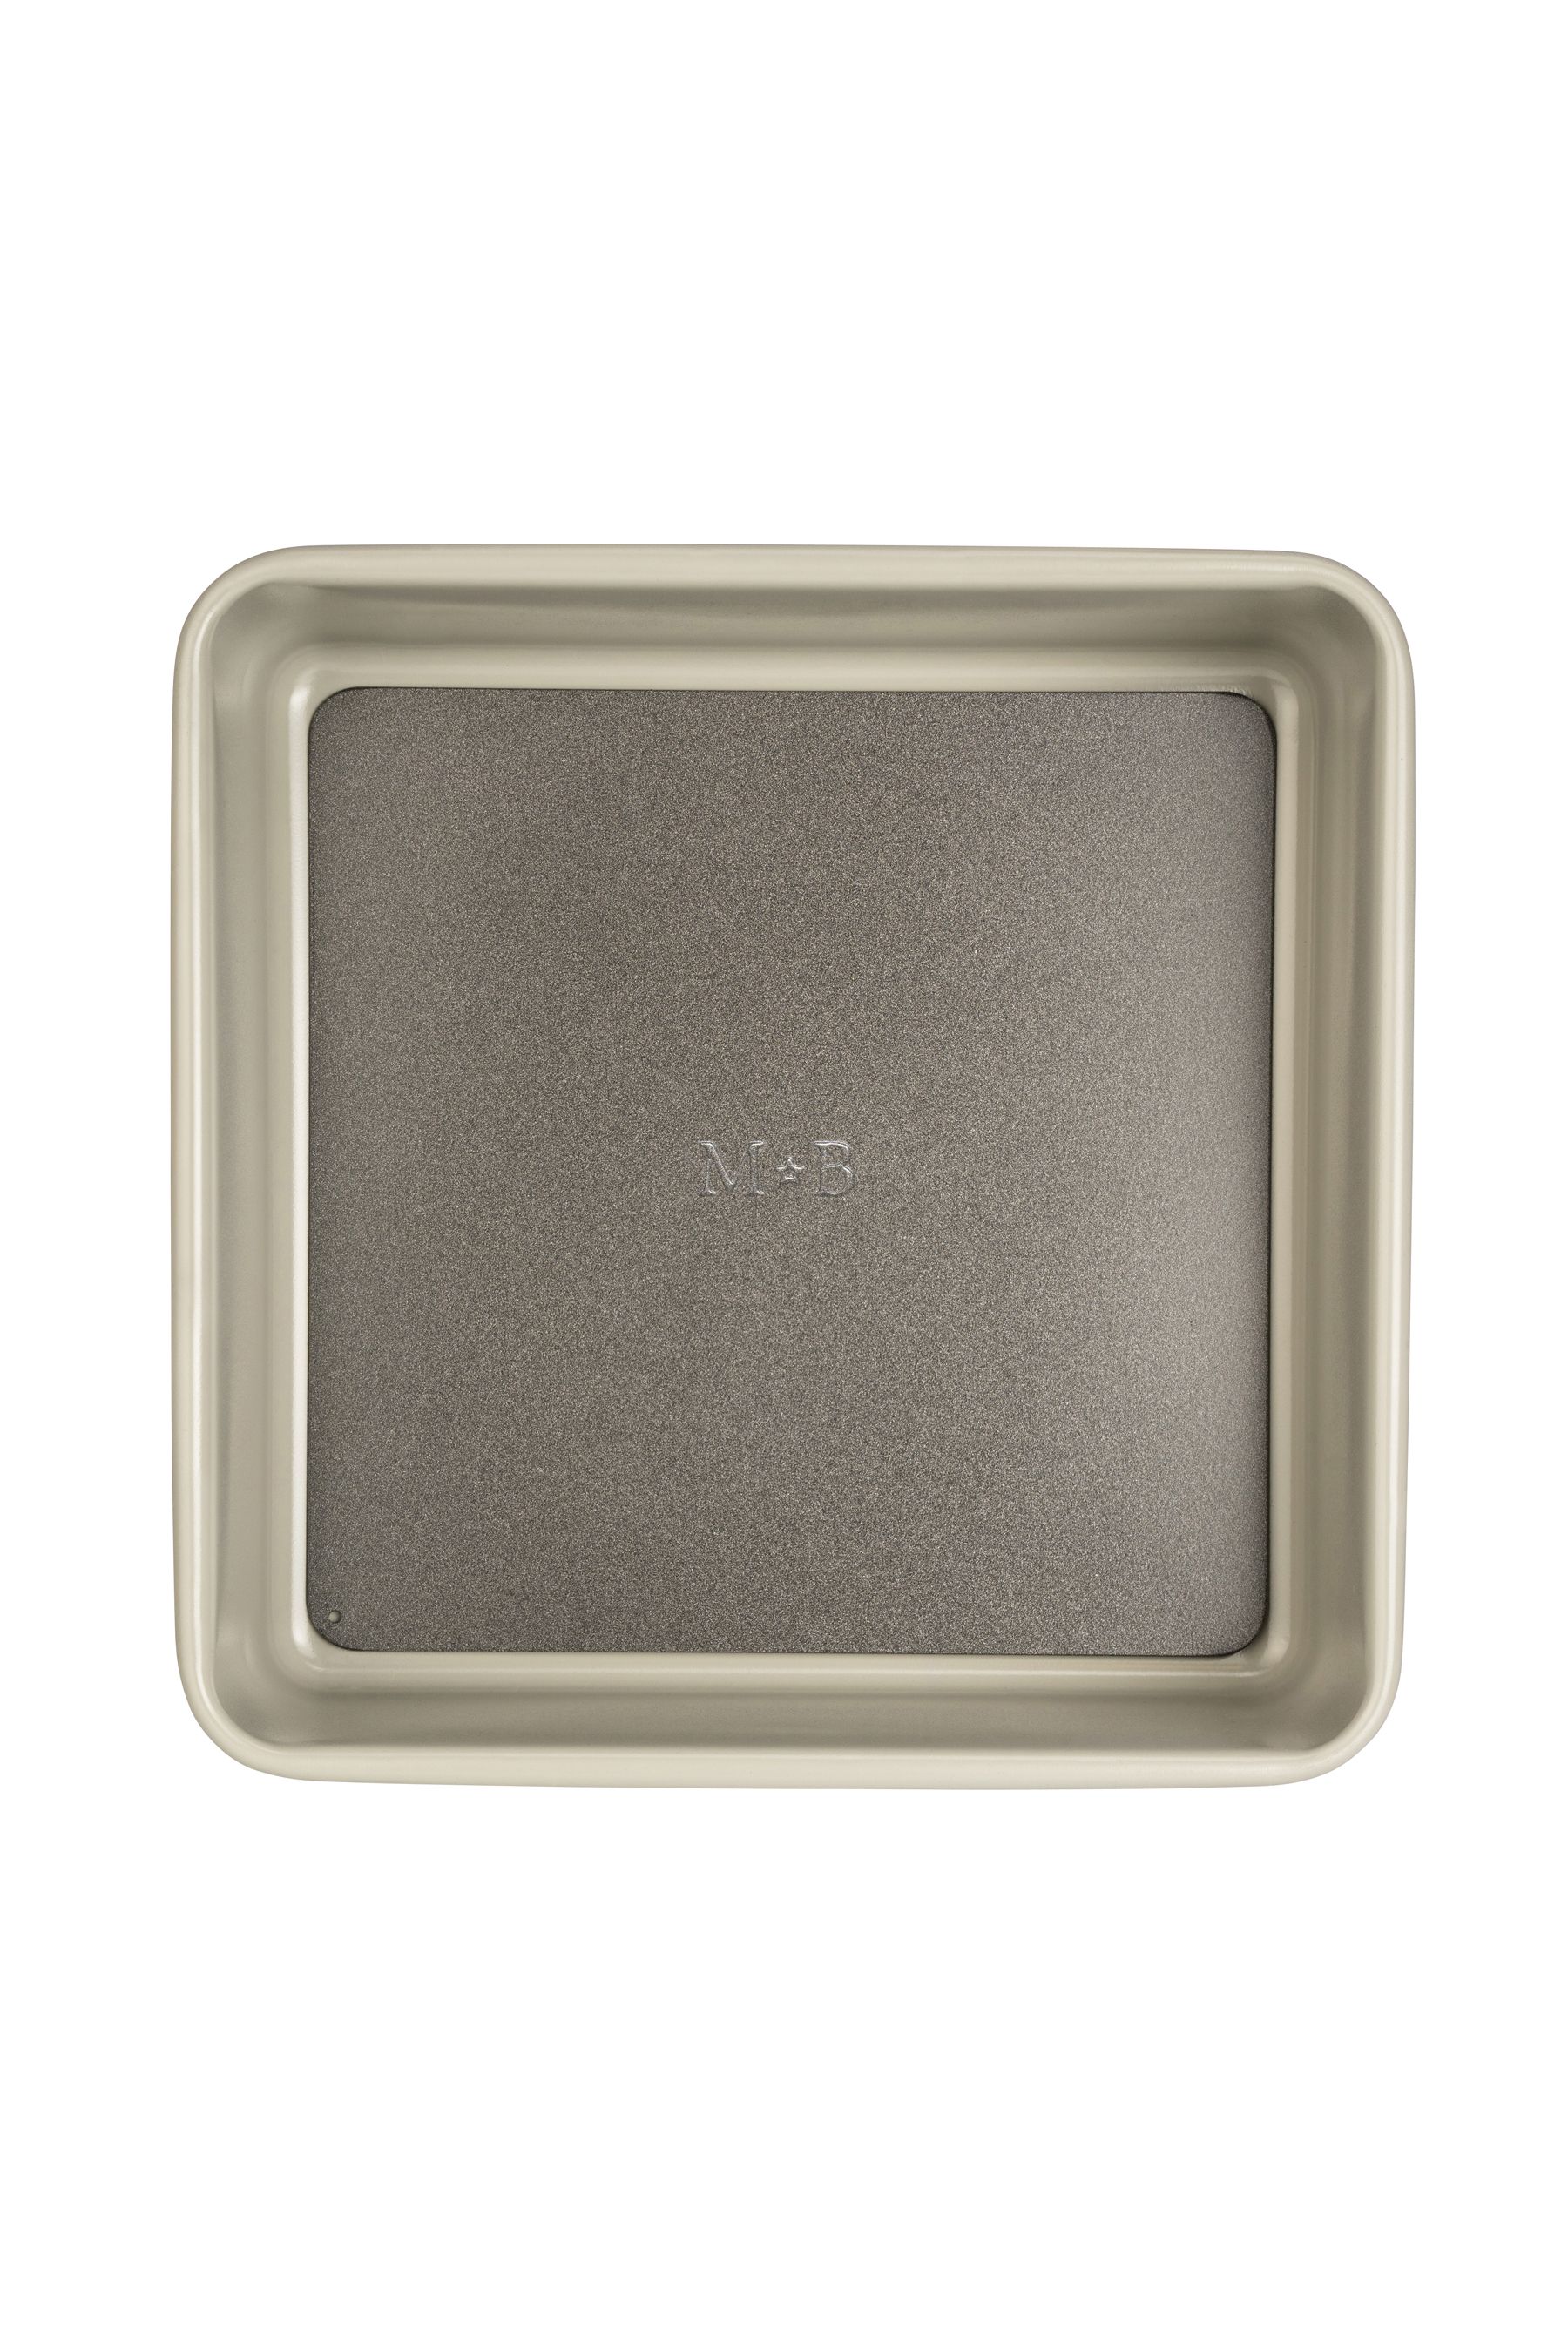 Buy Mary Berry Grey Square Cake Tin 20cm from the Next UK online shop